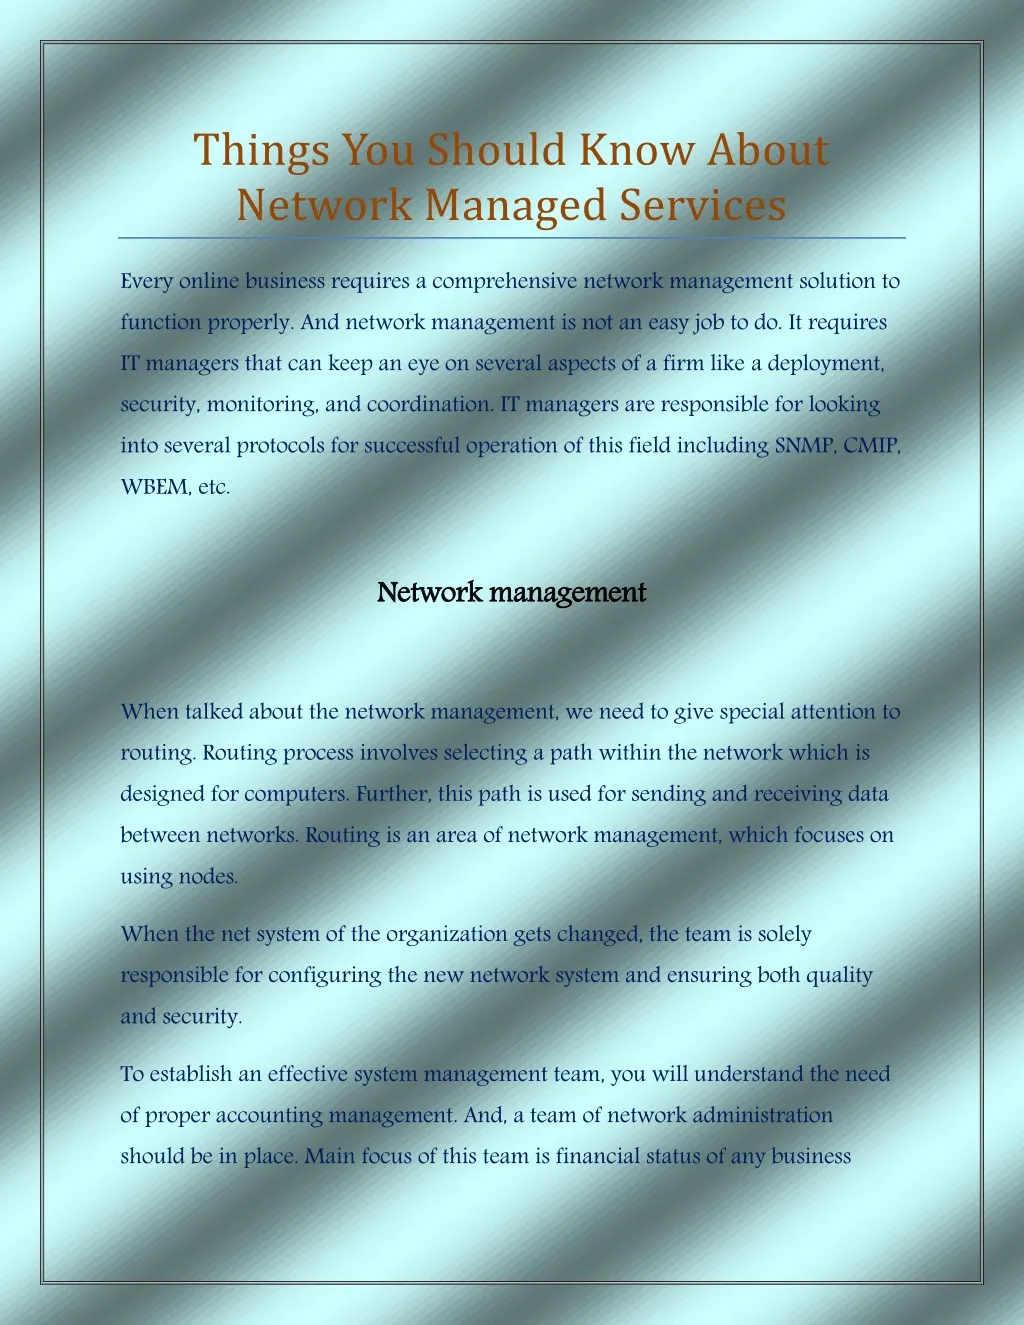 things you should know about network managed